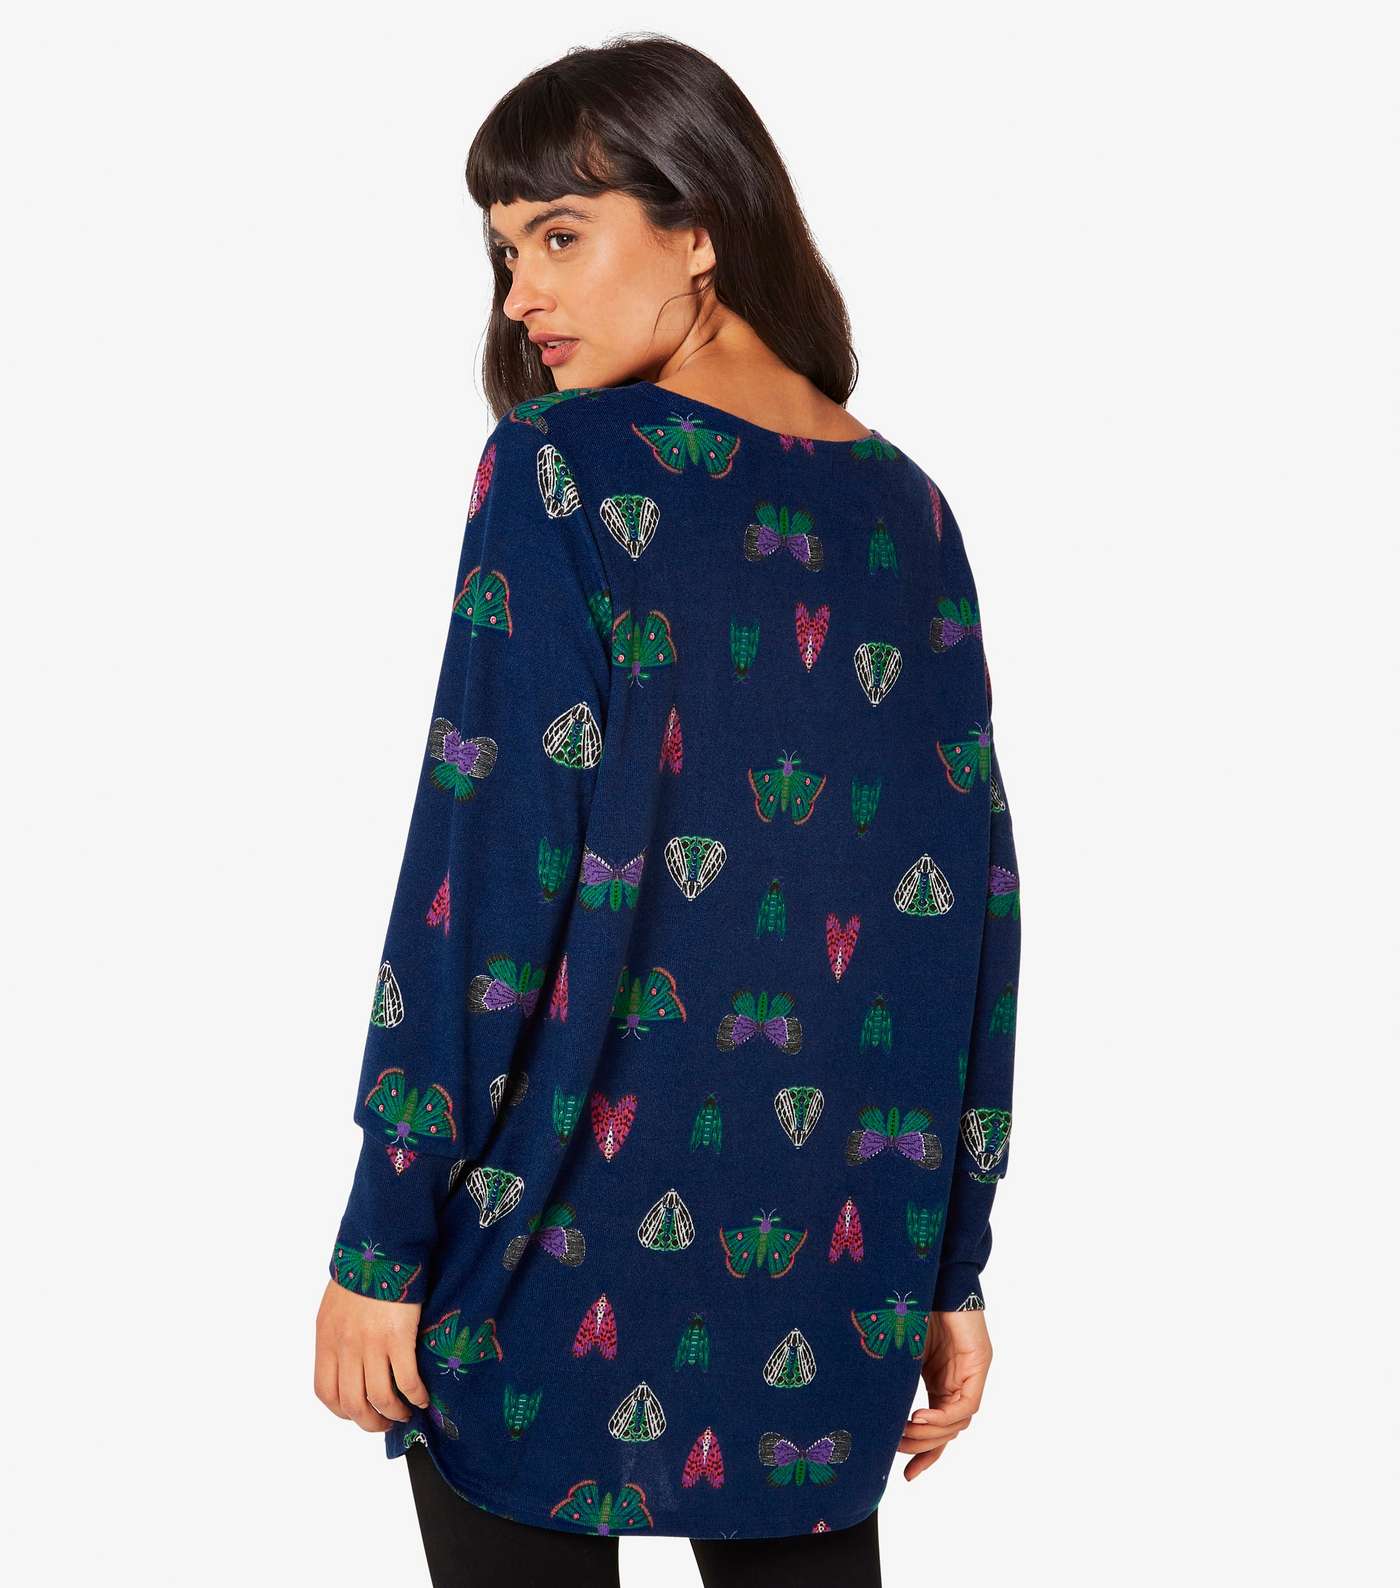 Apricot Navy Butterfly Print Crew Neck Long Top Image 3